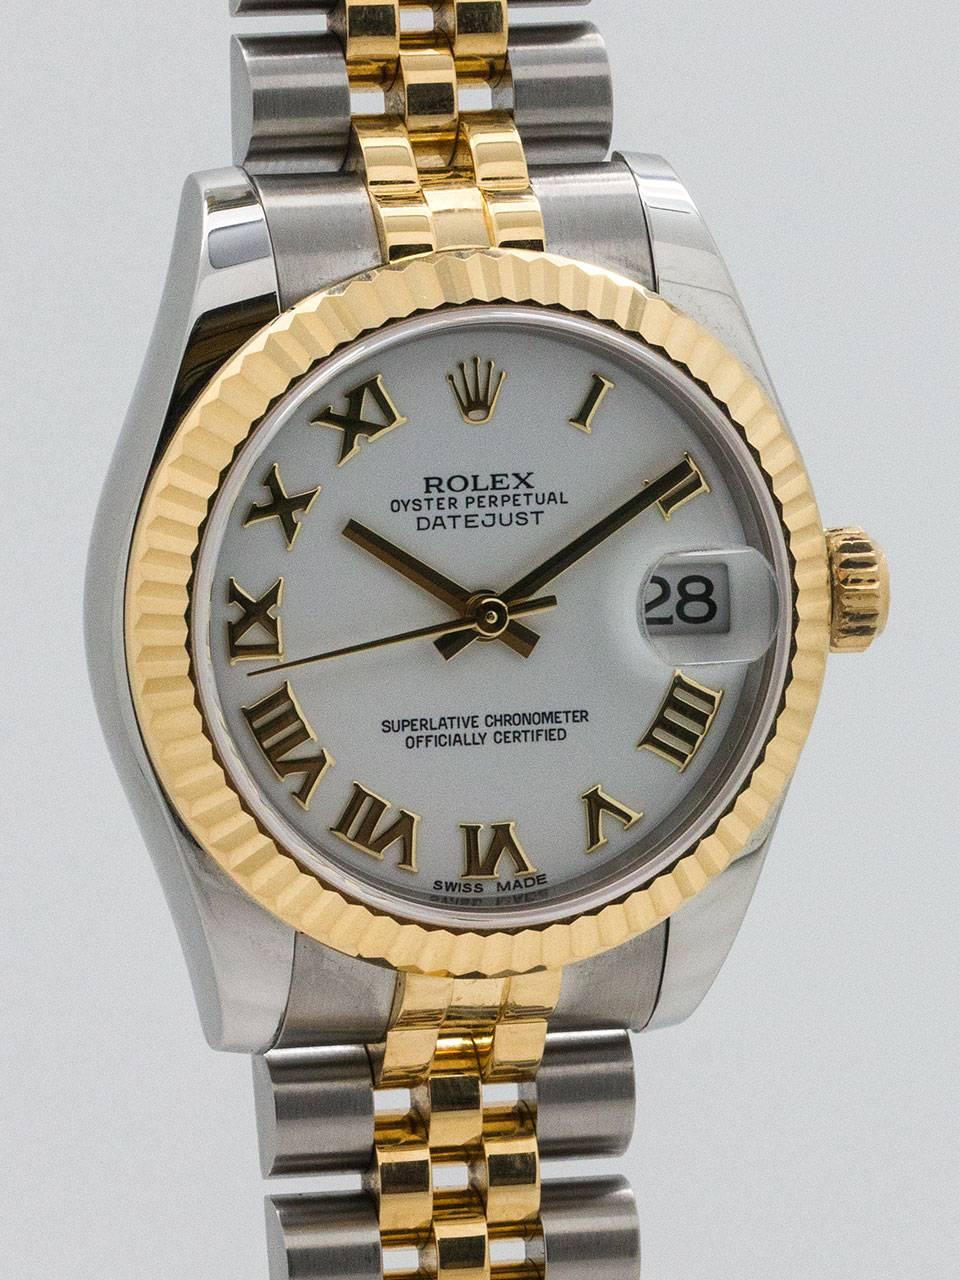 Rolex Stainless Steel and 18K Yellow Gold Midsize Datejust ref 178273;  serial #U0 circa 2015. New style robust case model, 31mm diameter case with 18K yellow gold fluted bezel and sapphire crystal. Original white enamel dial with applied gold Roman